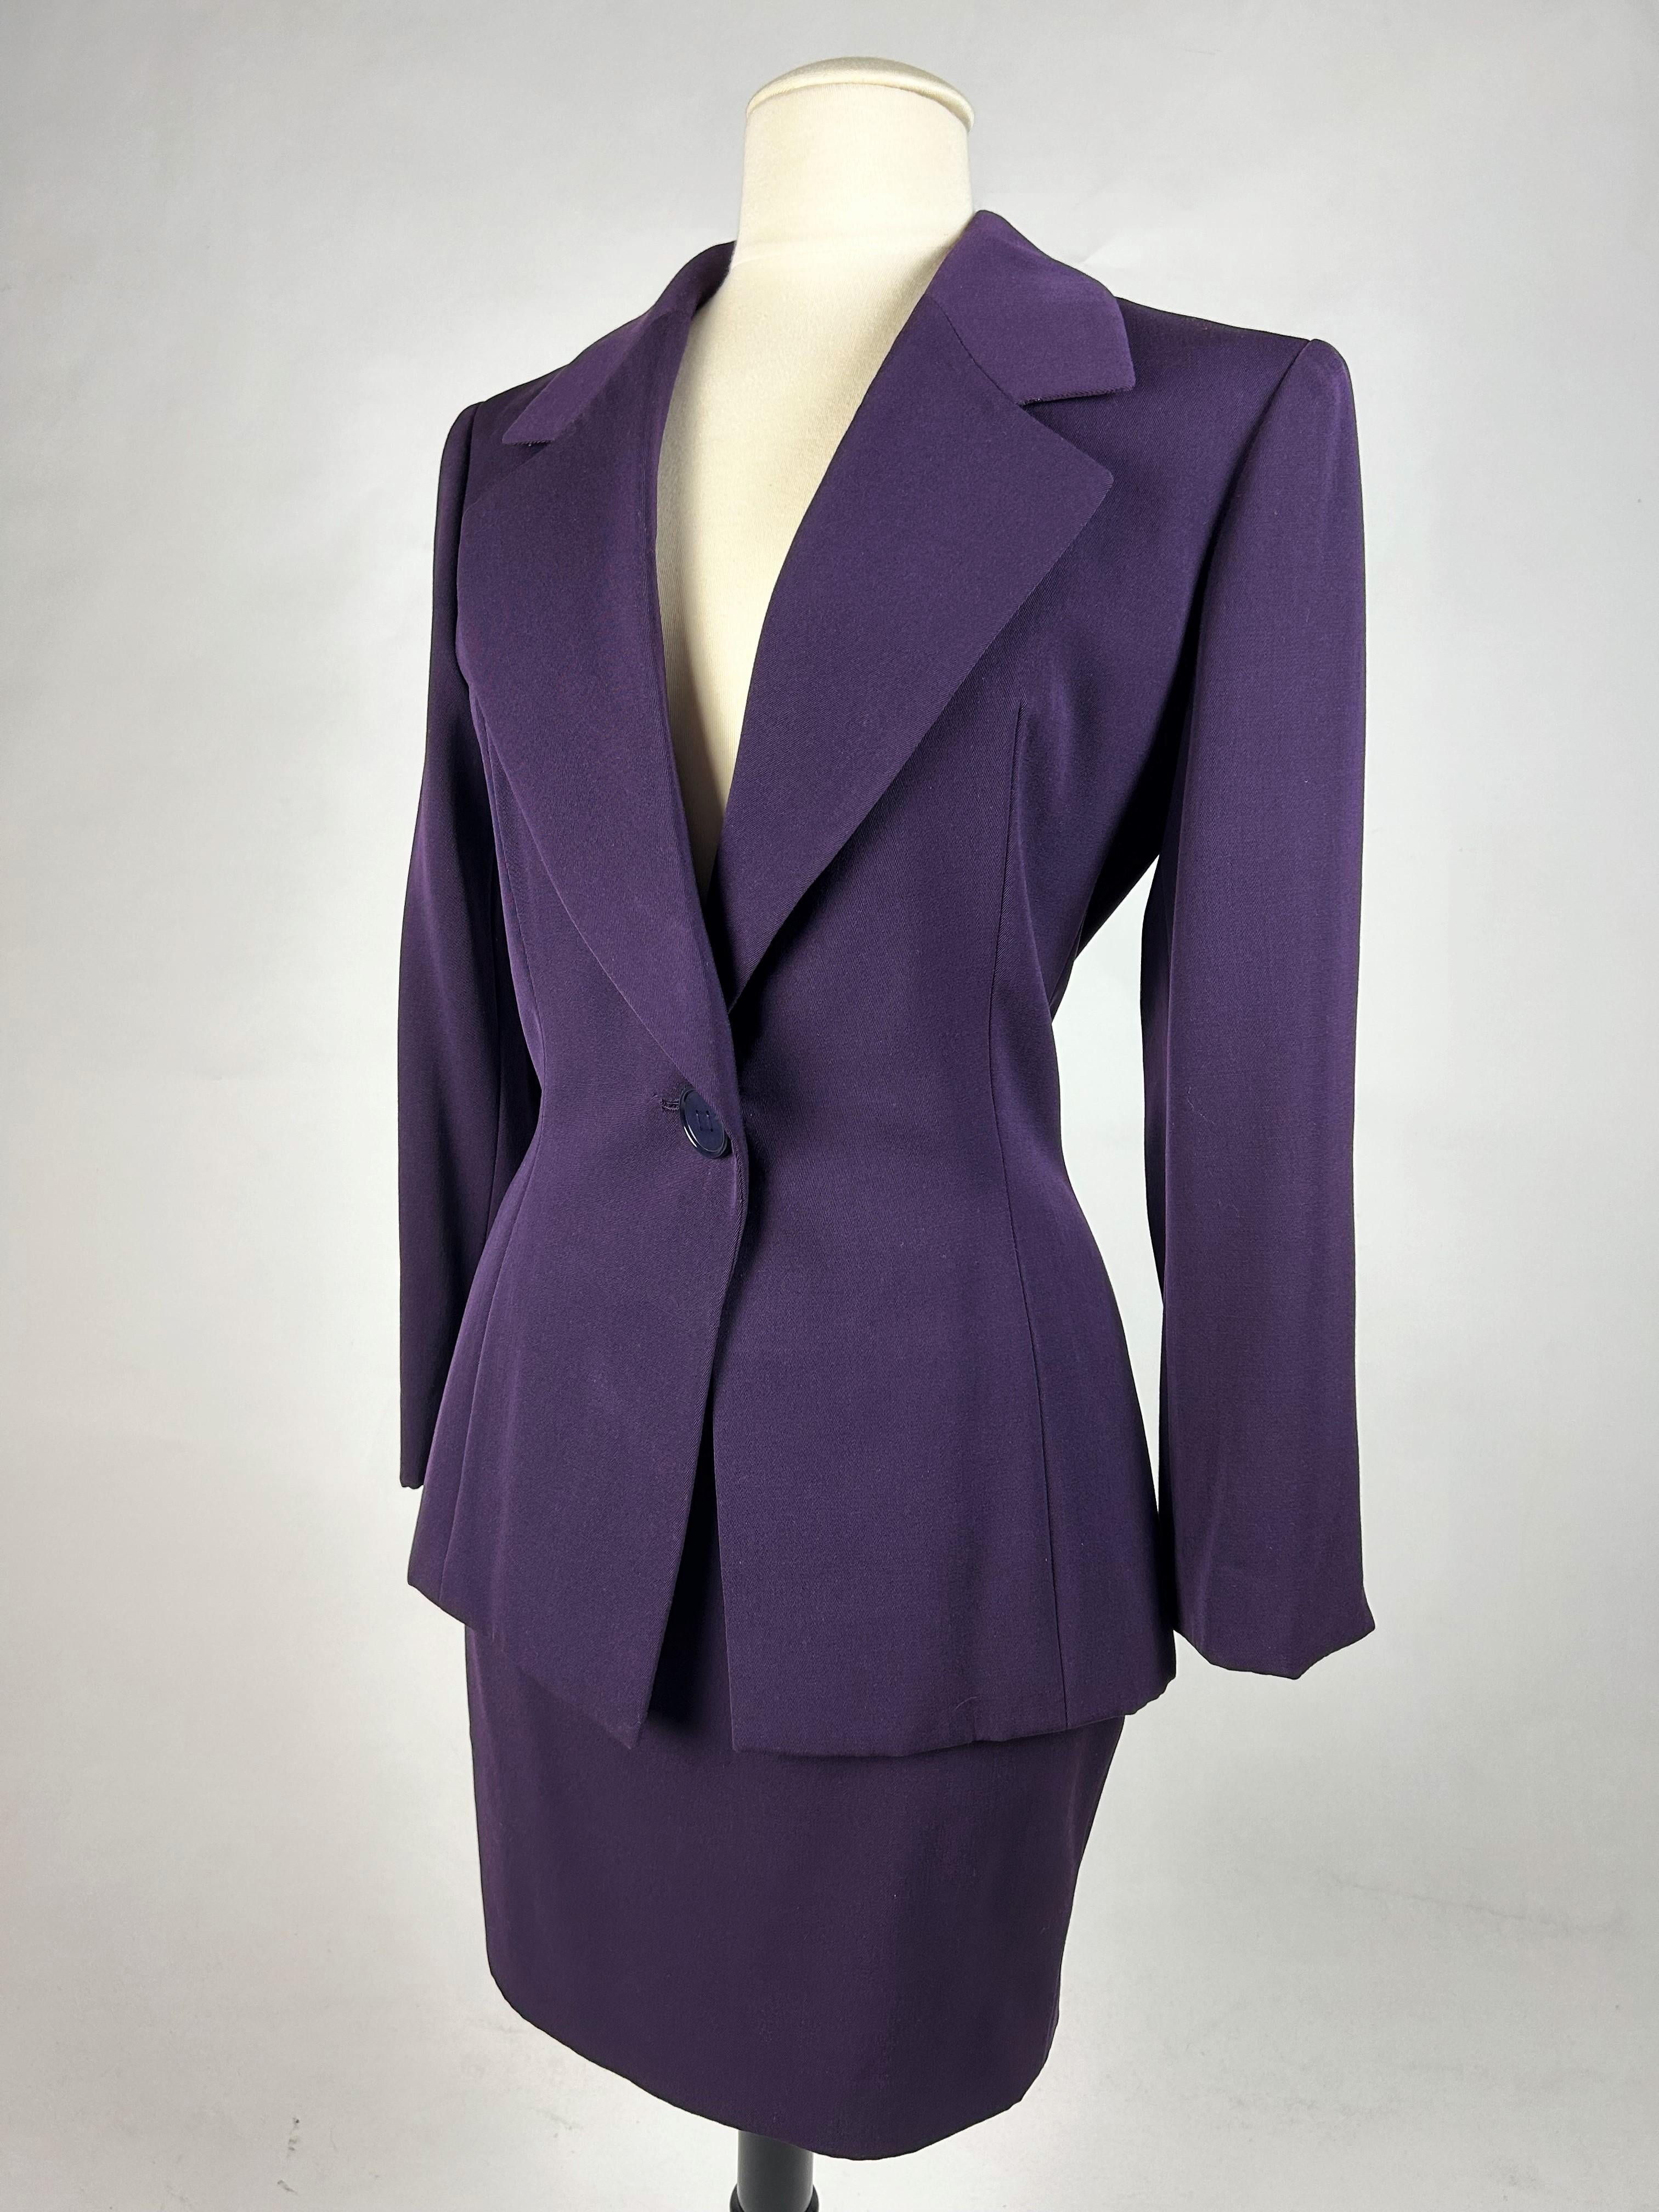 Skirt suit by Gianfranco Ferré for Christian Dior Haute Couture Circa 1995 For Sale 6